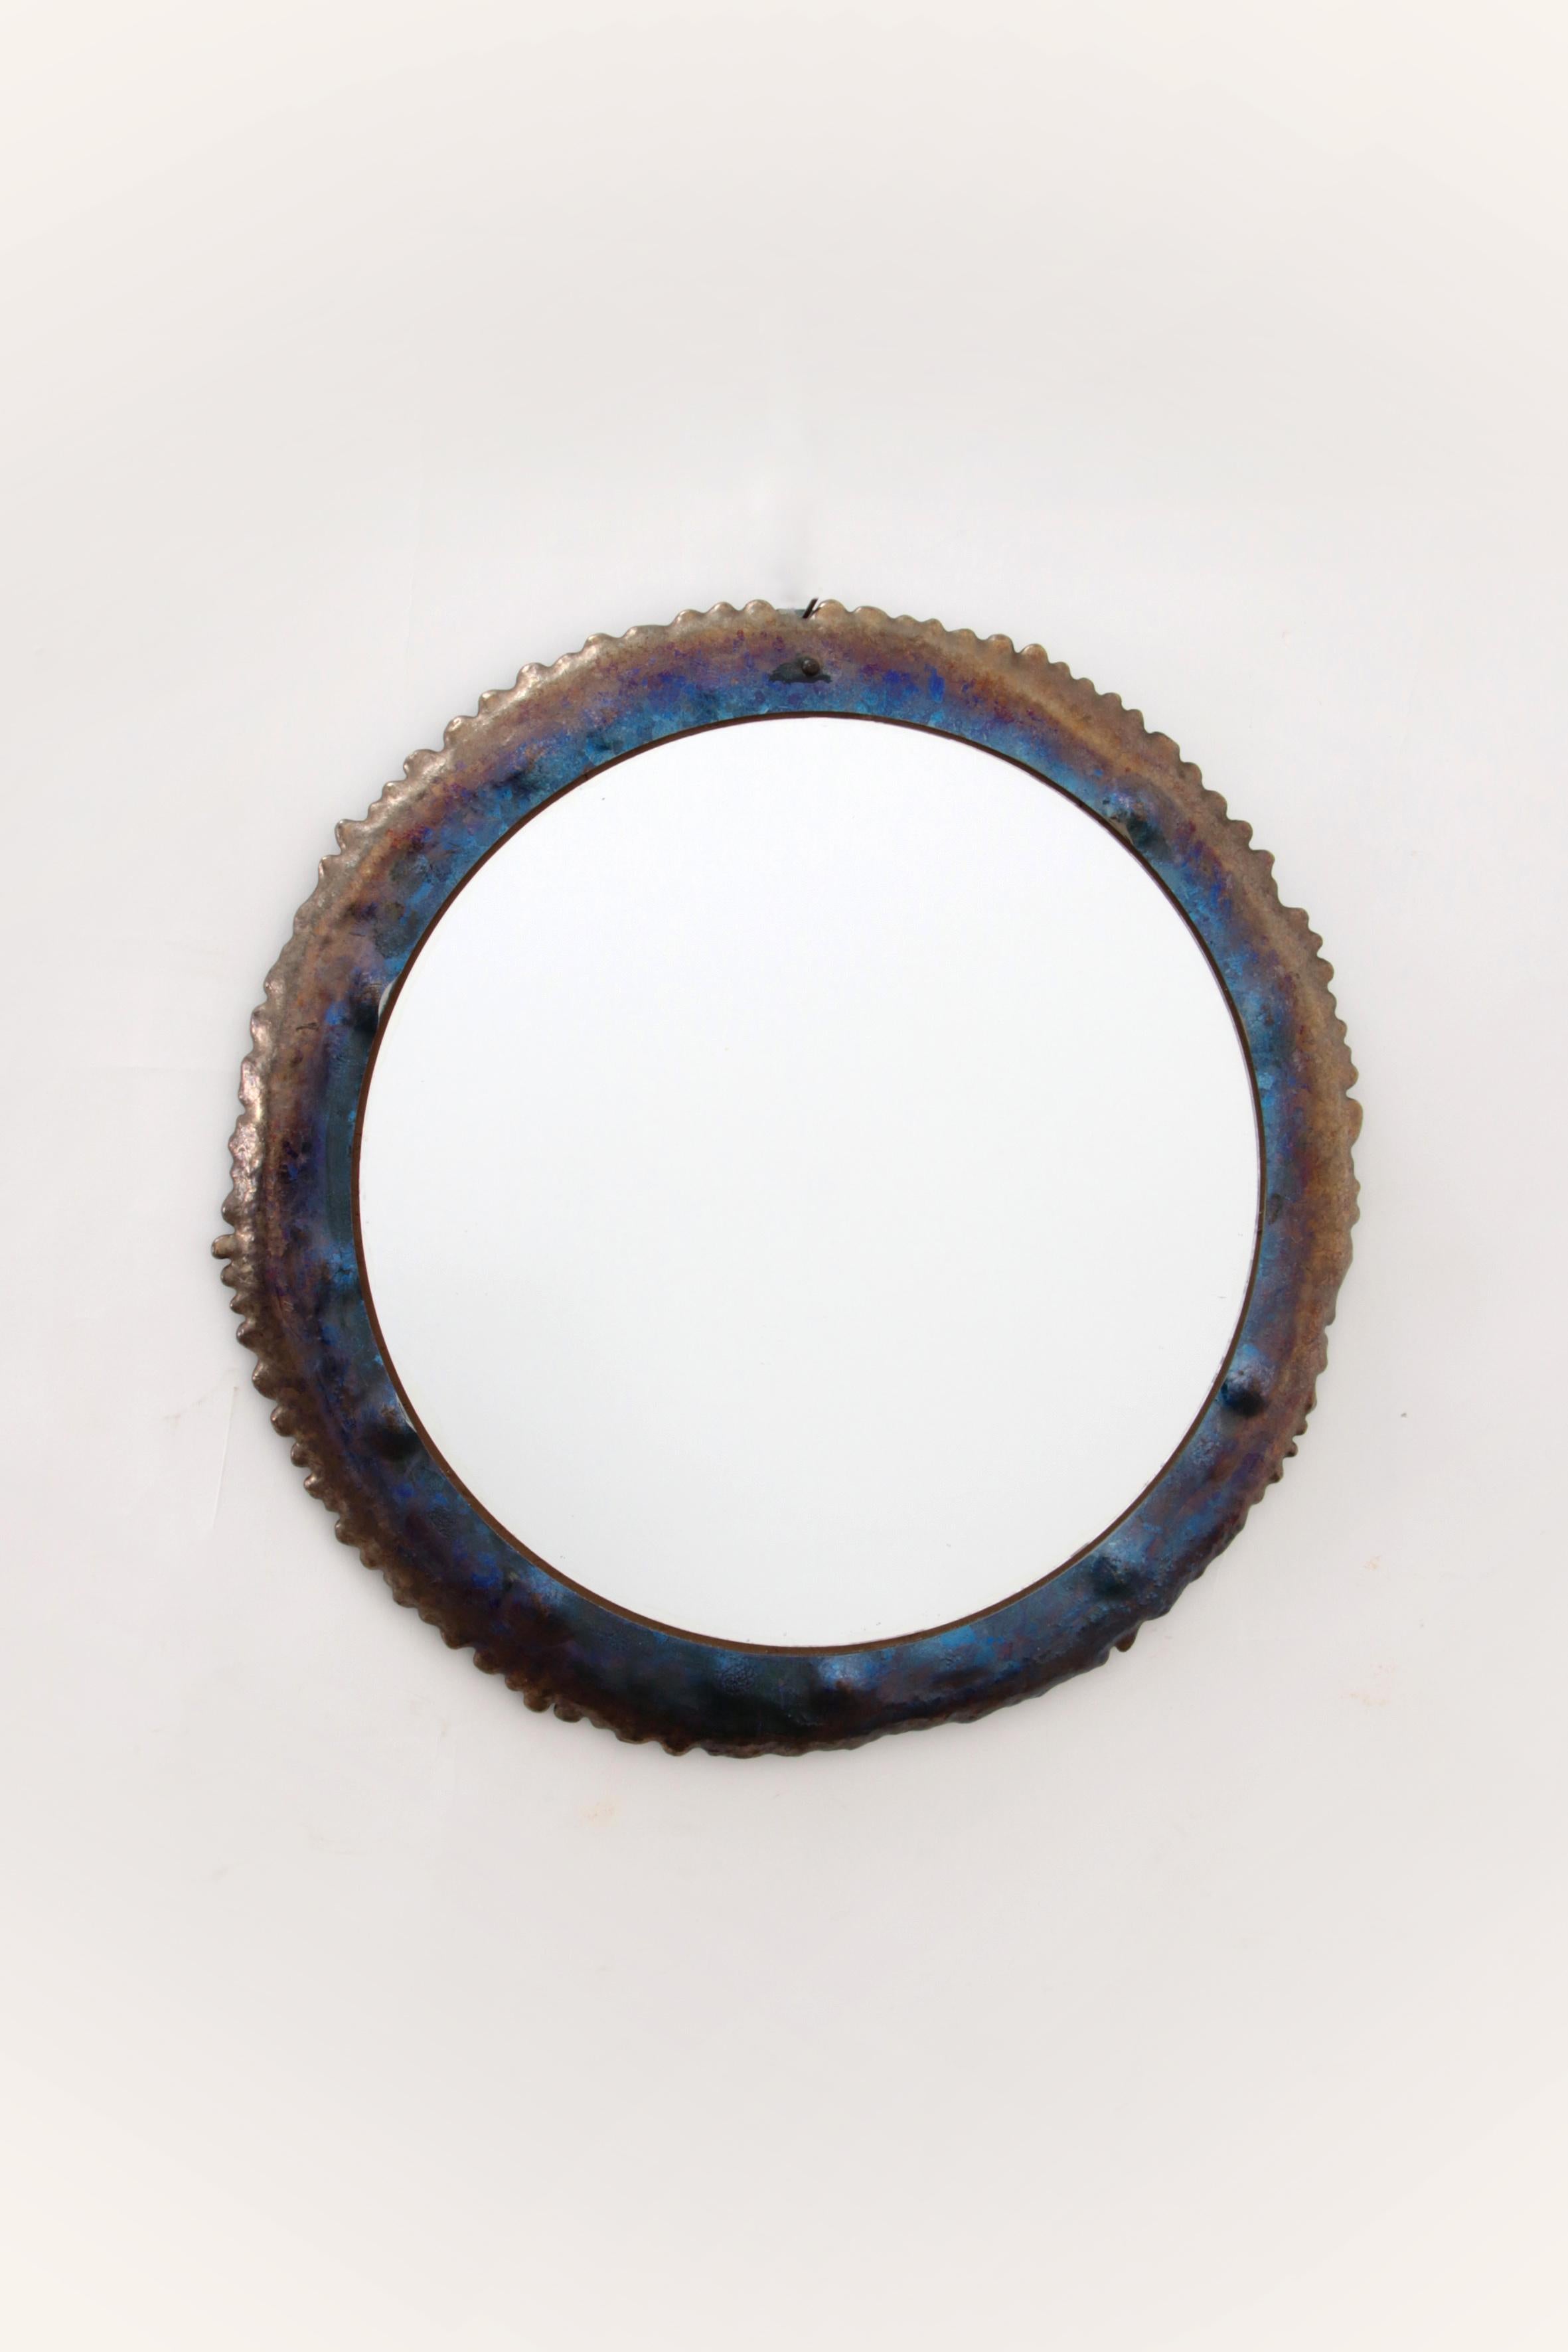 Brutalist tough Wall mirror with enamel on metal 1970s


This is a rare mirror with a very nice brutalist look. Made of metal with glaze over it, which gives a blue glow to the metal.

This mirror comes from Italy and was made in the 1970s.